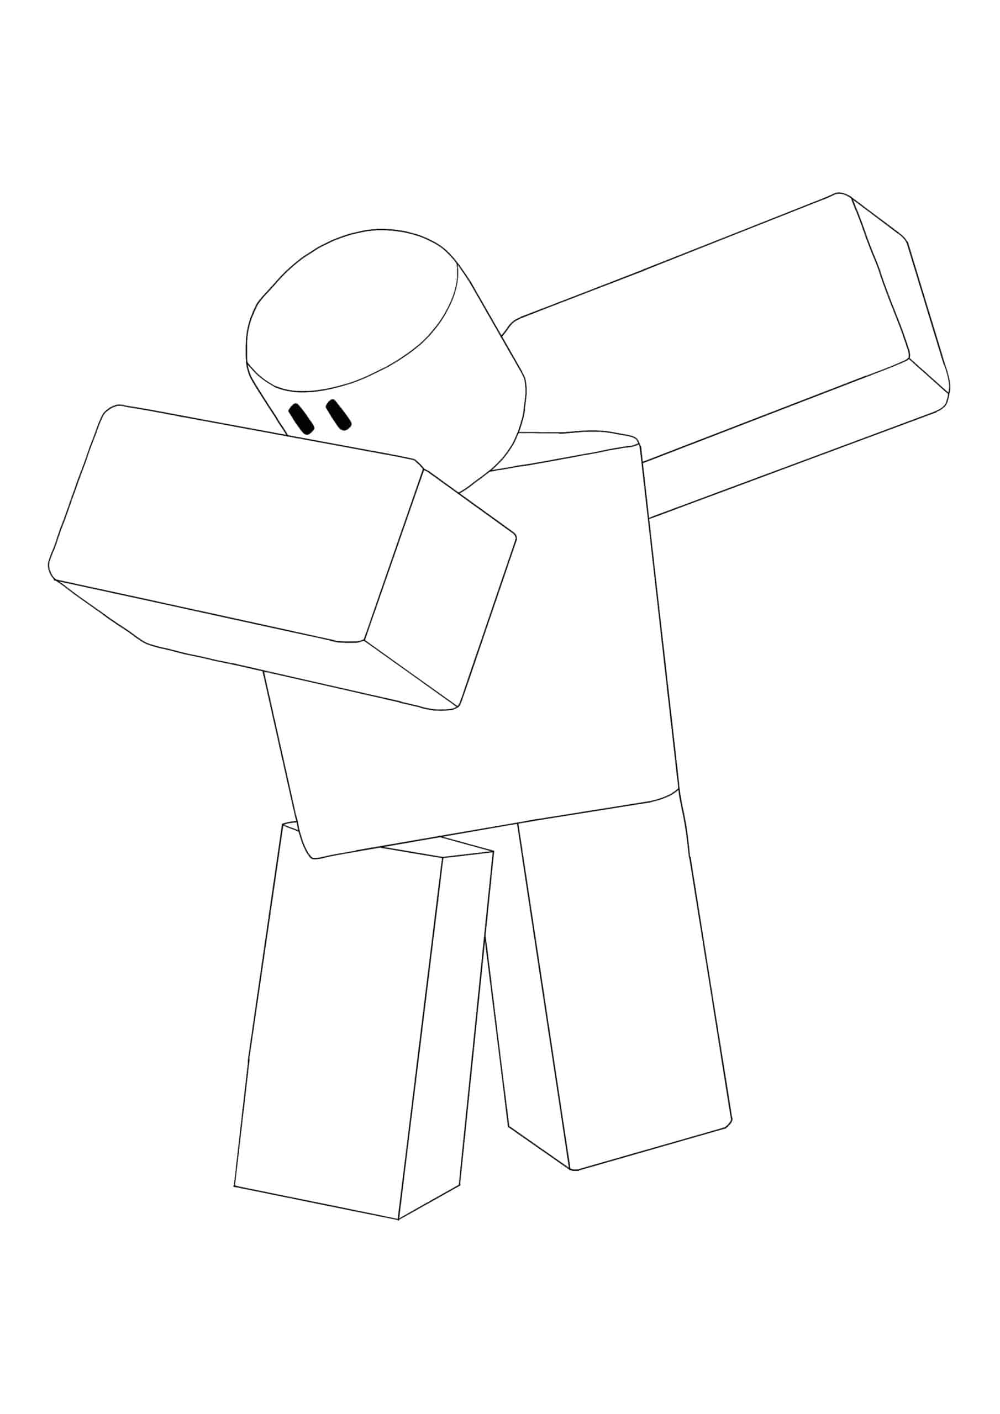 Roblox Noob Coloring Pages - 2 Free Coloring Sheets (2021) | Free printable coloring  sheets, Free coloring sheets, Printable coloring sheets